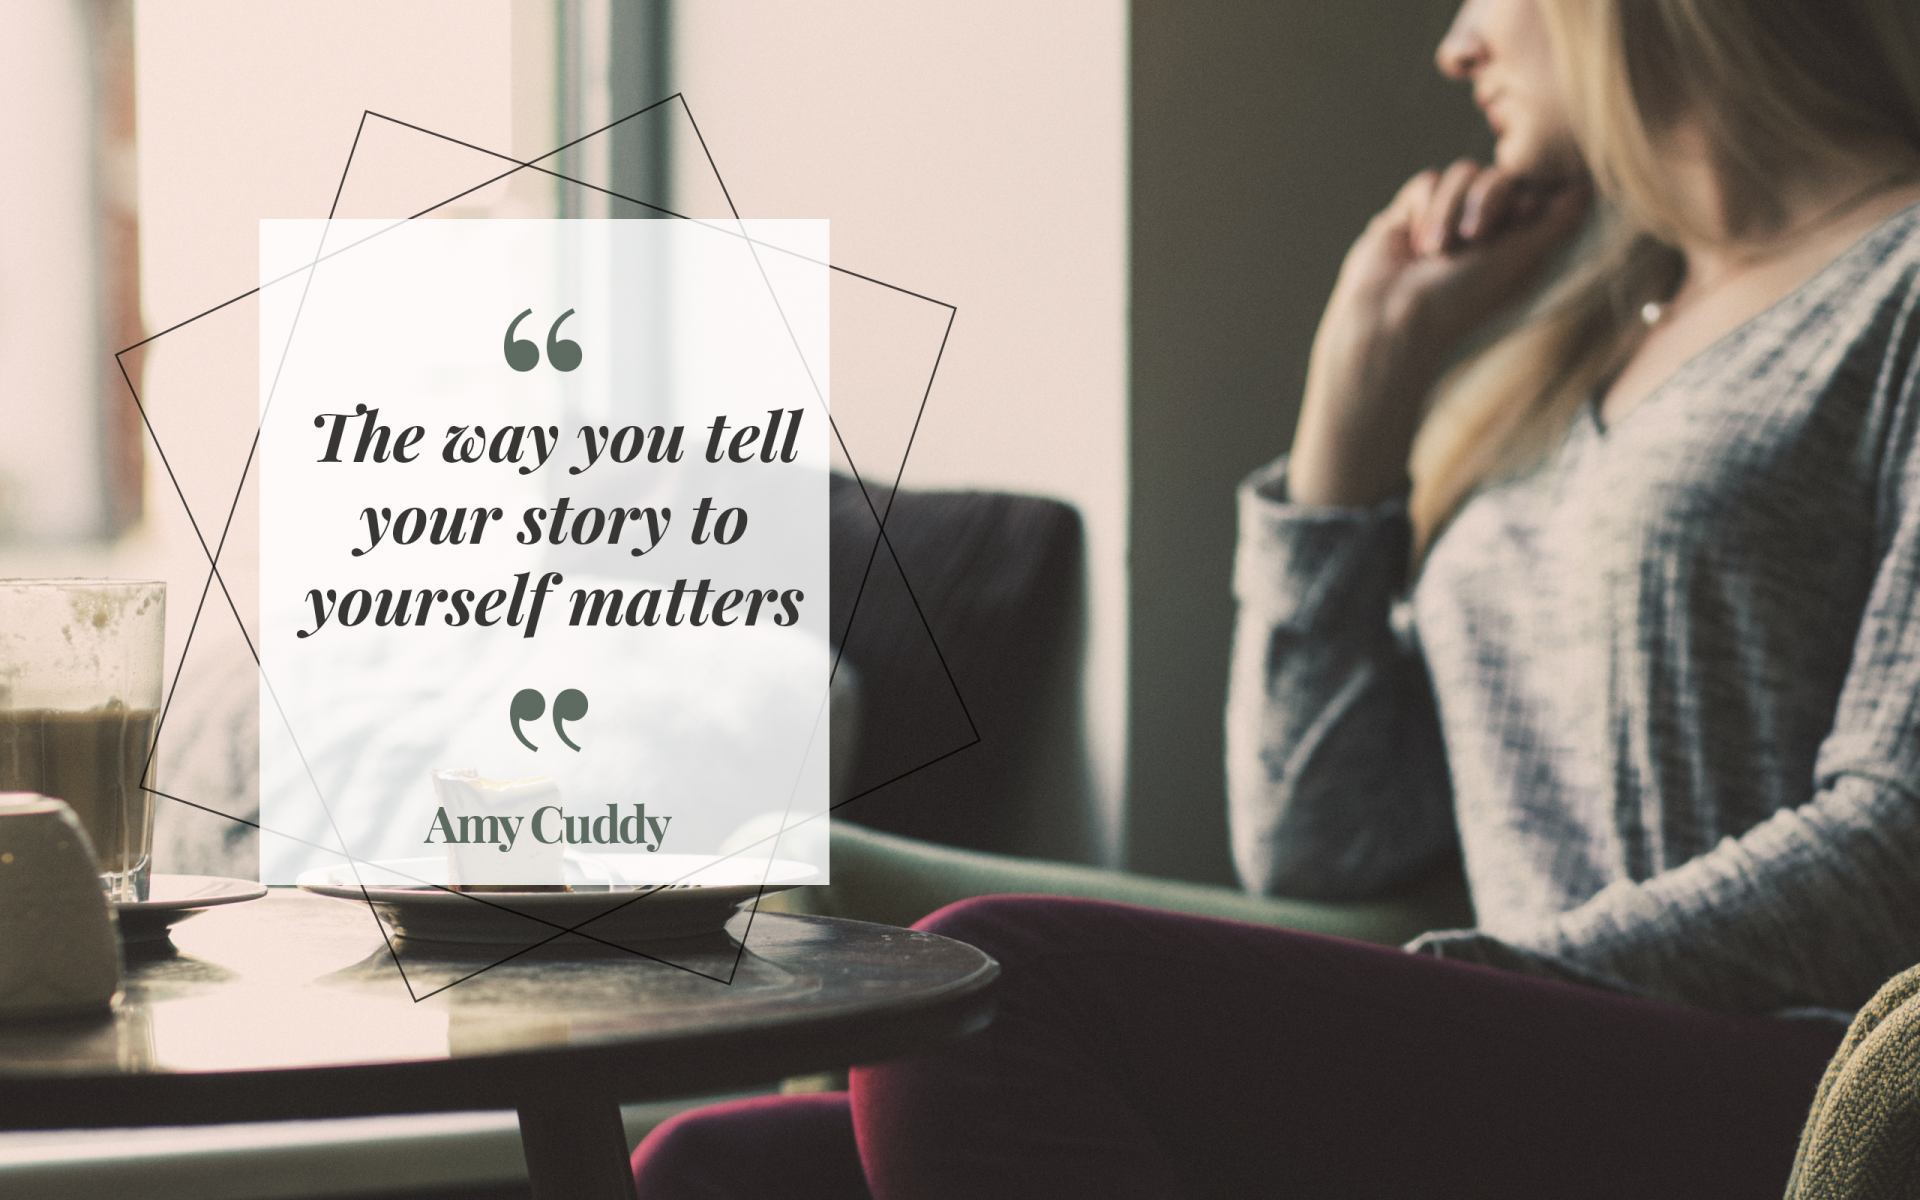 The Way You Tell Your Story To Yourself Matters Amy Cuddy 19 10 Quotethee Daily Quotes For Inspiration Motivation